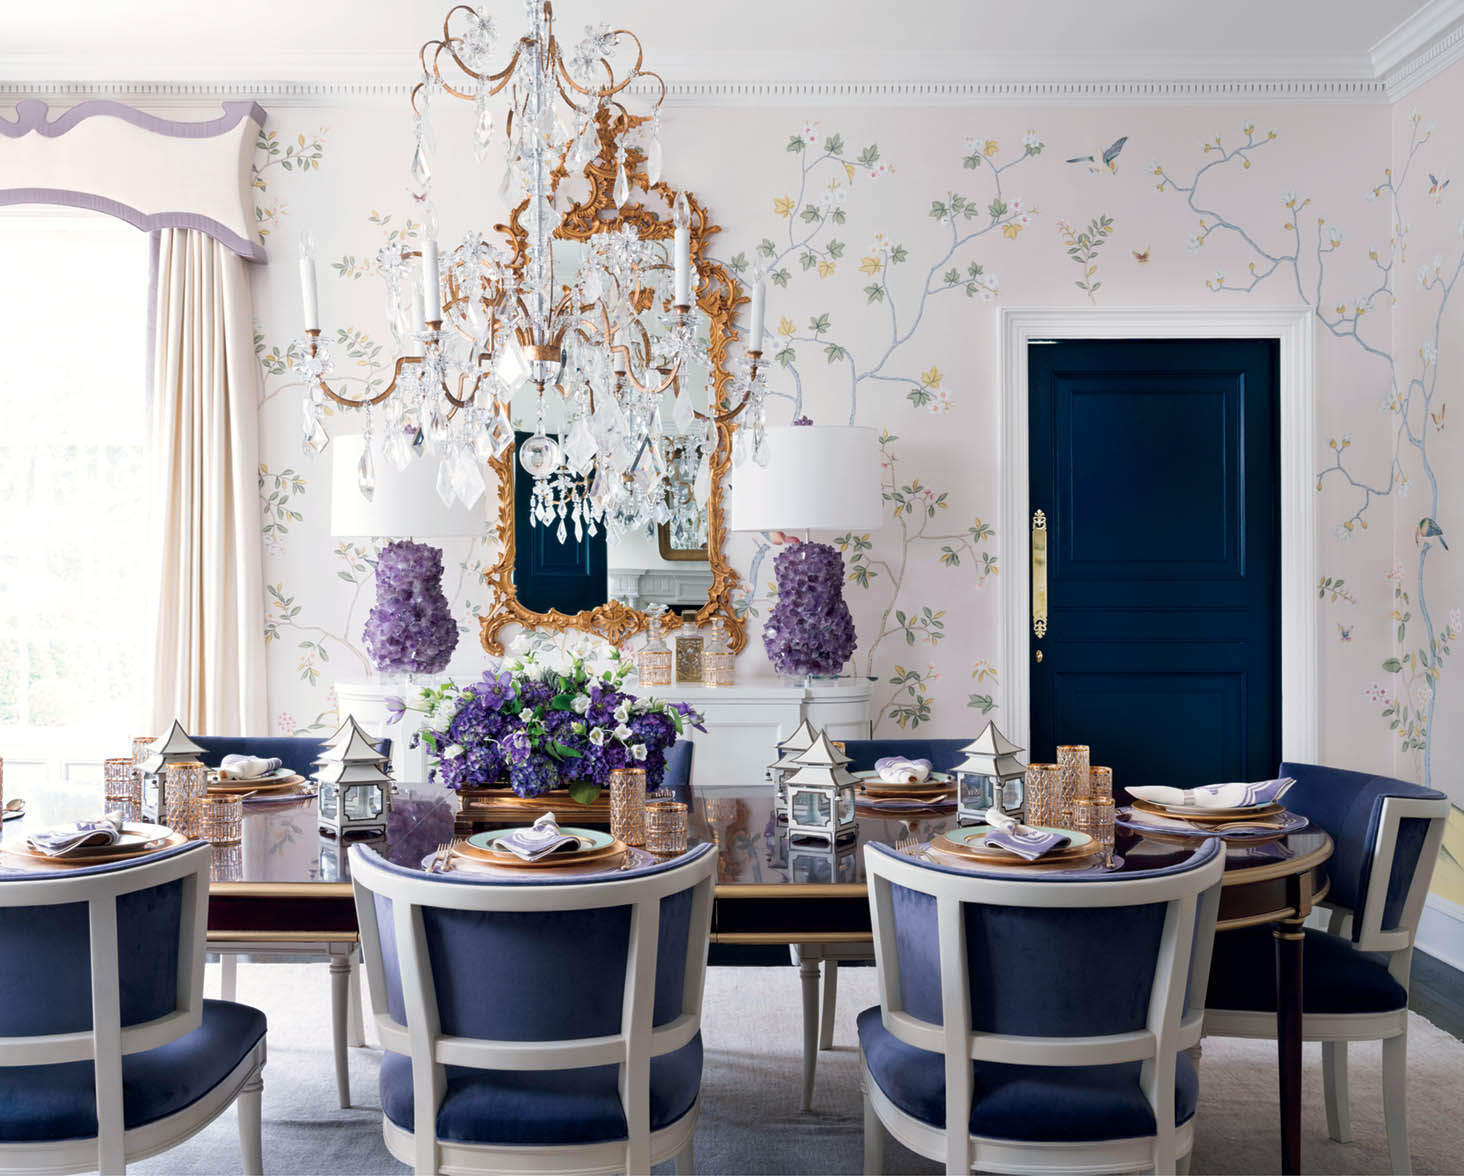 A dining room by interior designer Melanie Turner, featured in her book, Inviting Interiors. The room features a light and airy floral wallpaper on a white background, dental molding, a grand crystal chandelier, a gilt mirror flanked by two lamps with amethyst bases. She mixes wood tones, with a dark wood dining table with gild edges pared with white-wood framed dining chairs with navy upholstery. The door is painted navy.